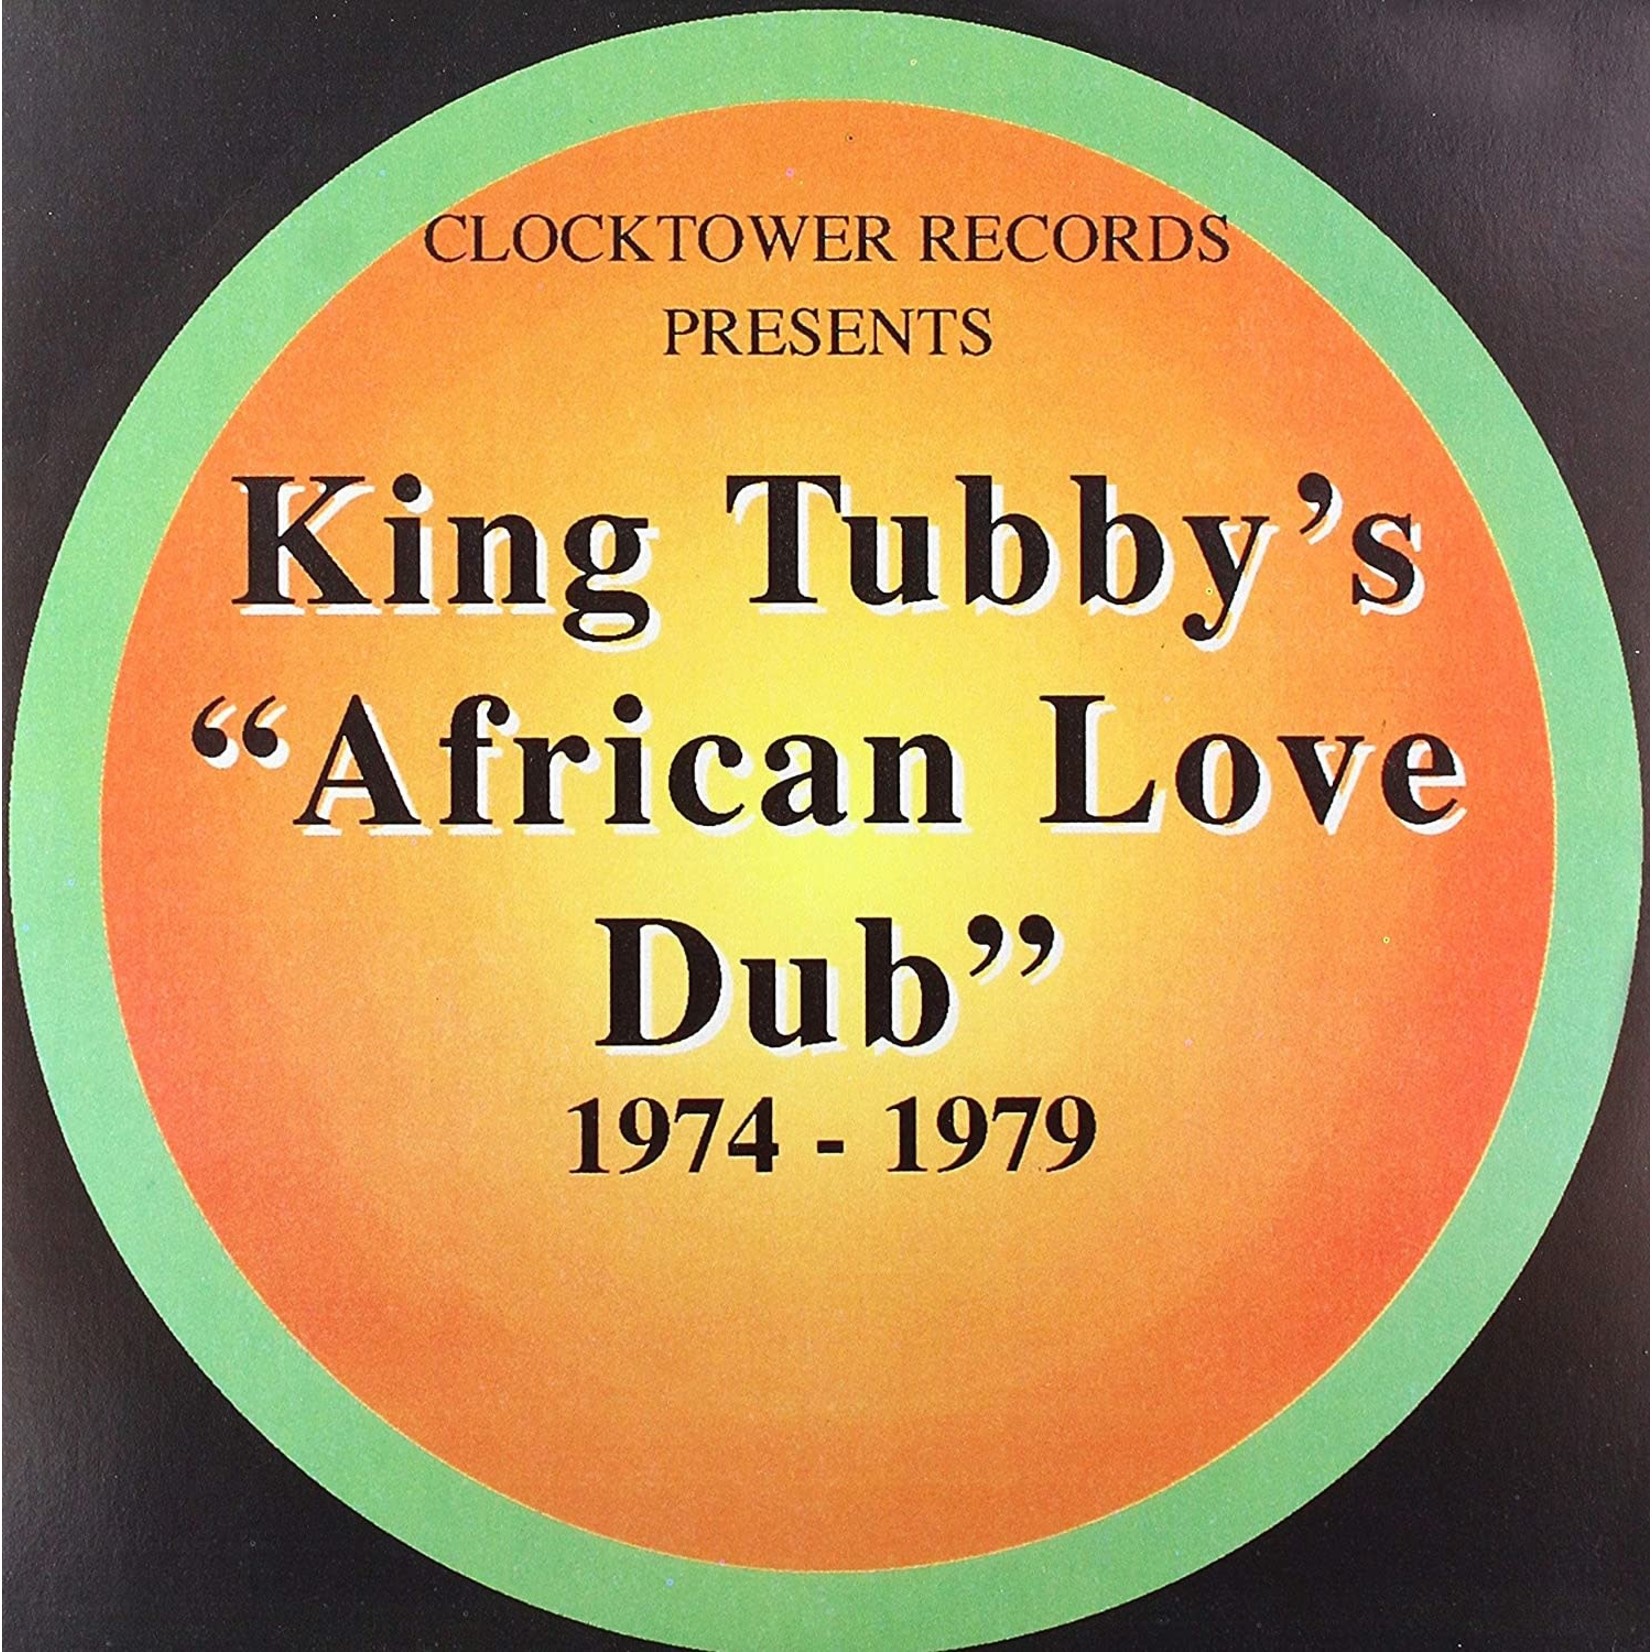 [New] King Tubby - African Love Dub 1974-1979